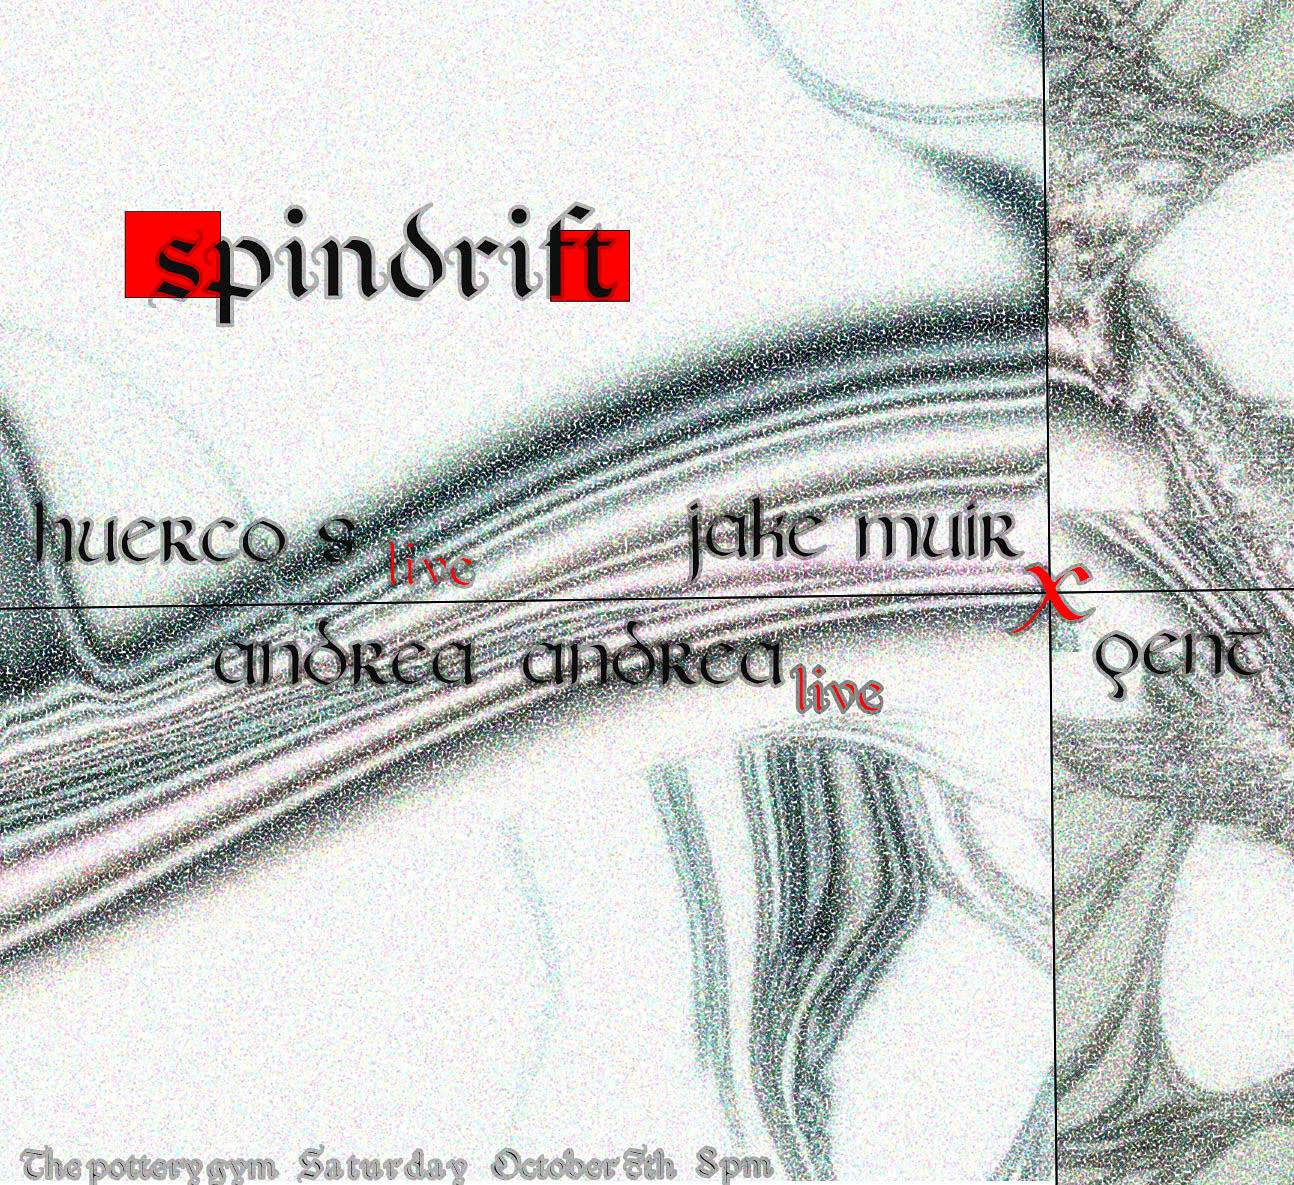 Spindrift feat. Huerco S, Pent x Jake Muir, andrea andrea - フライヤー表